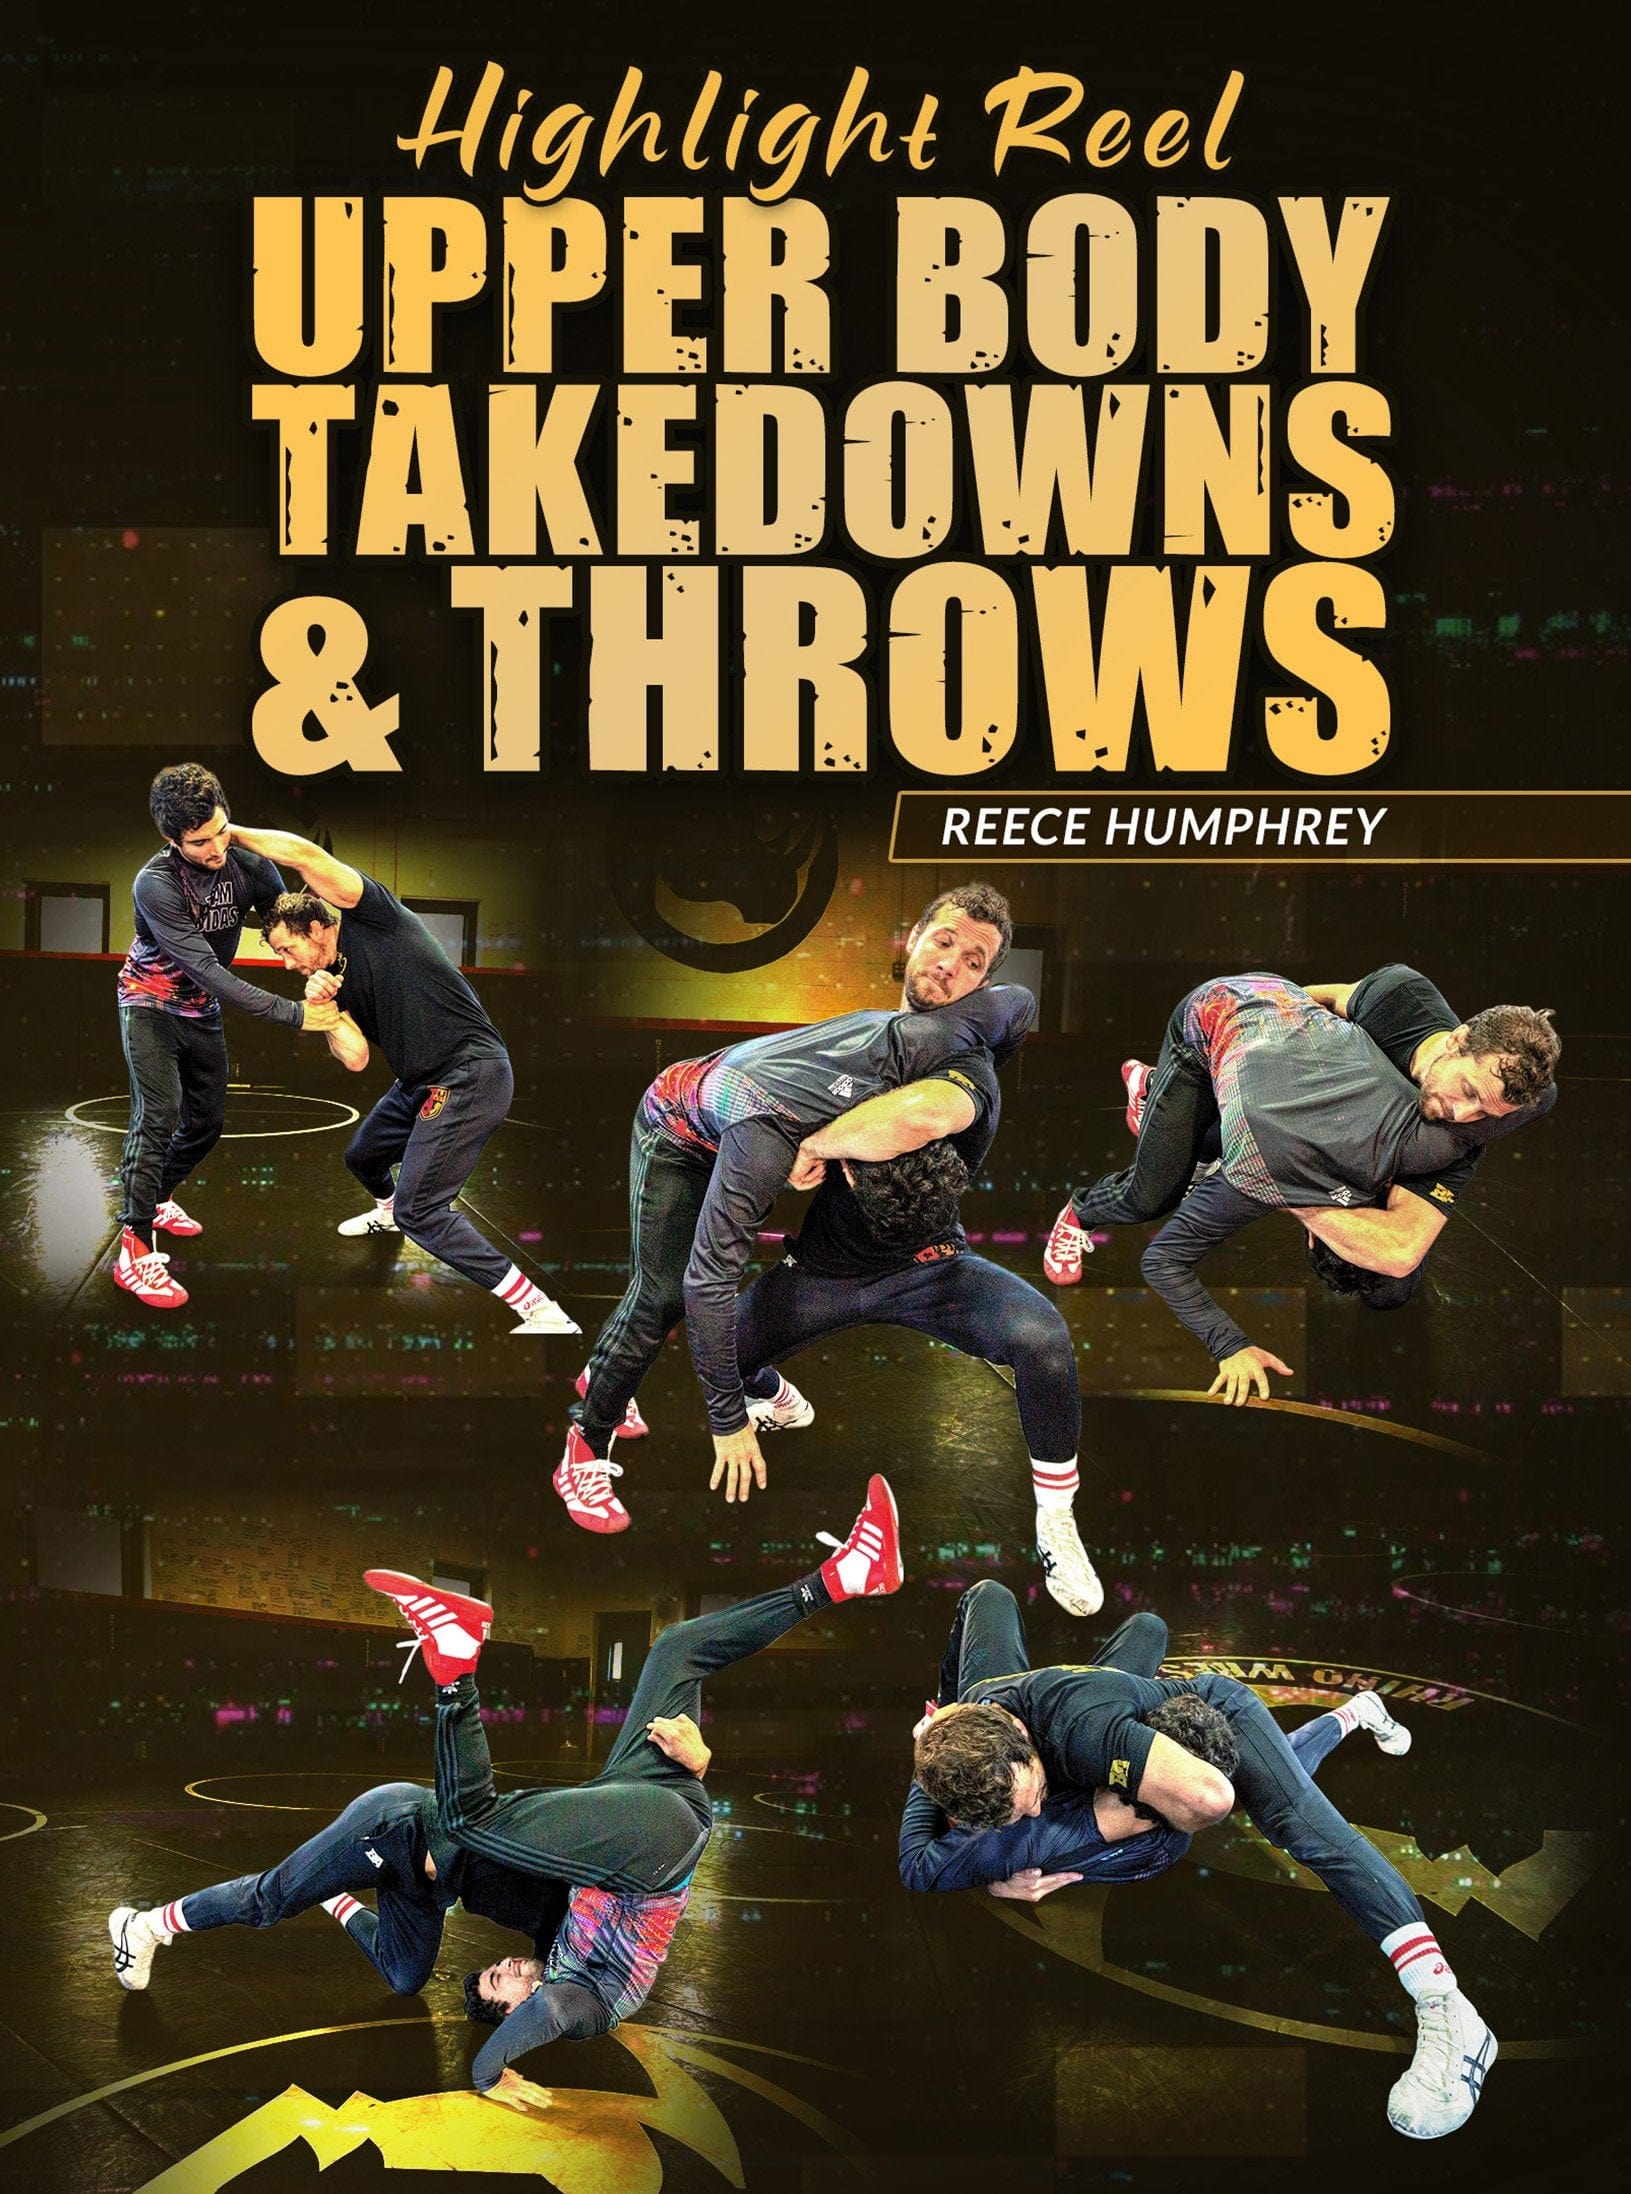 Highlight Reel Upper Body Takedowns and Throws by Reece Humphrey - Fanatic Wrestling